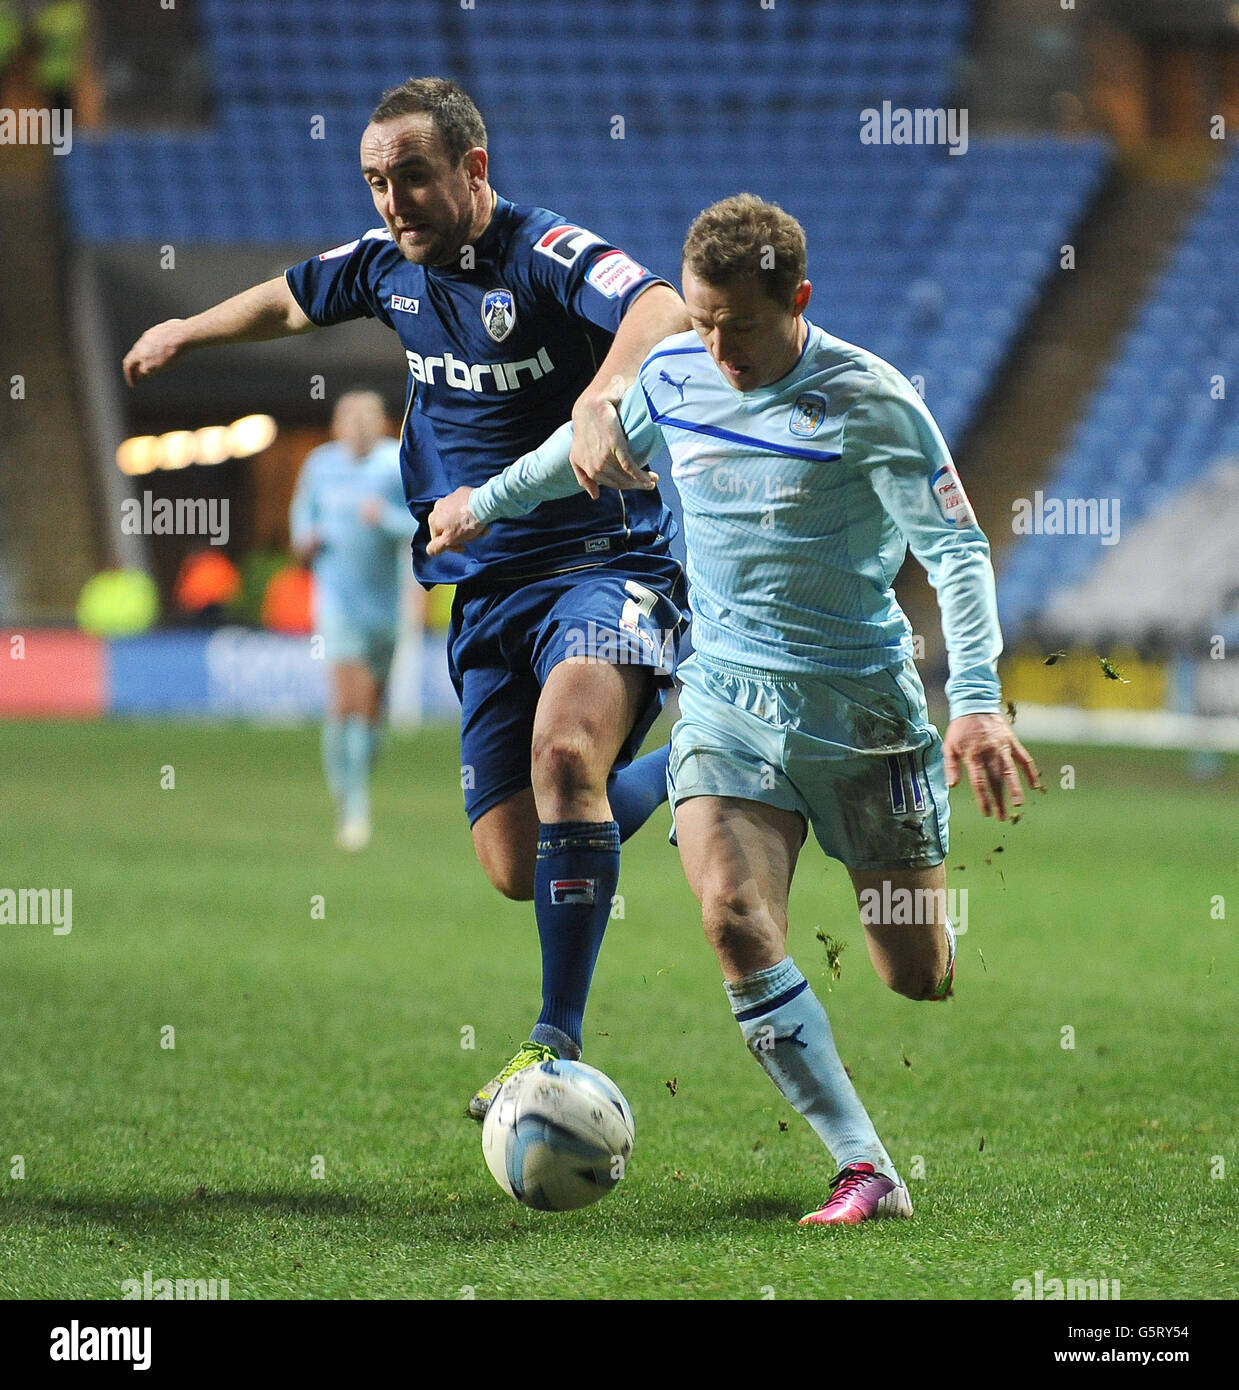 Coventry City's Gary McSheffrey (right) and Oldham Athletic's Connor Brown (left) during the npower League One match at the Ricoh Arena, Coventry. Stock Photo